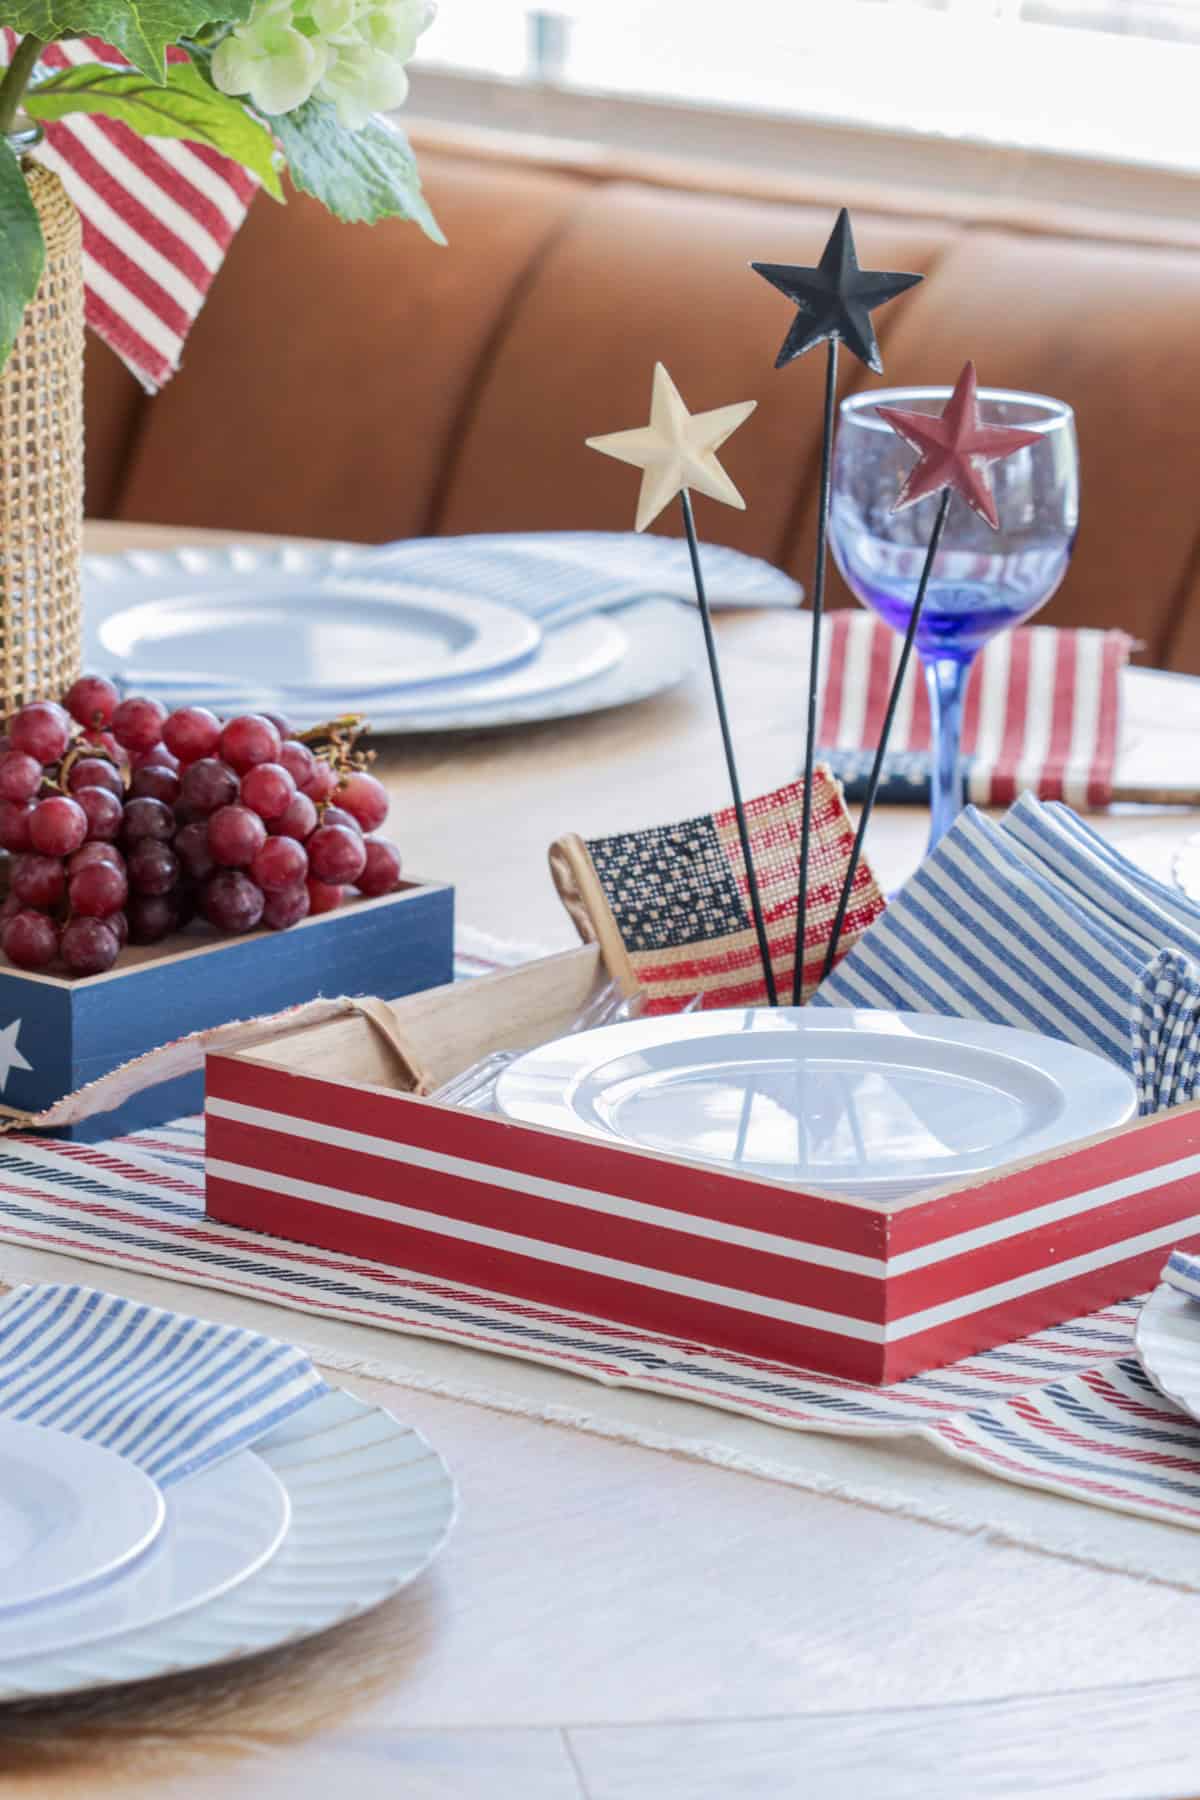 Red white and blue decor with red box holding plates and napkins.